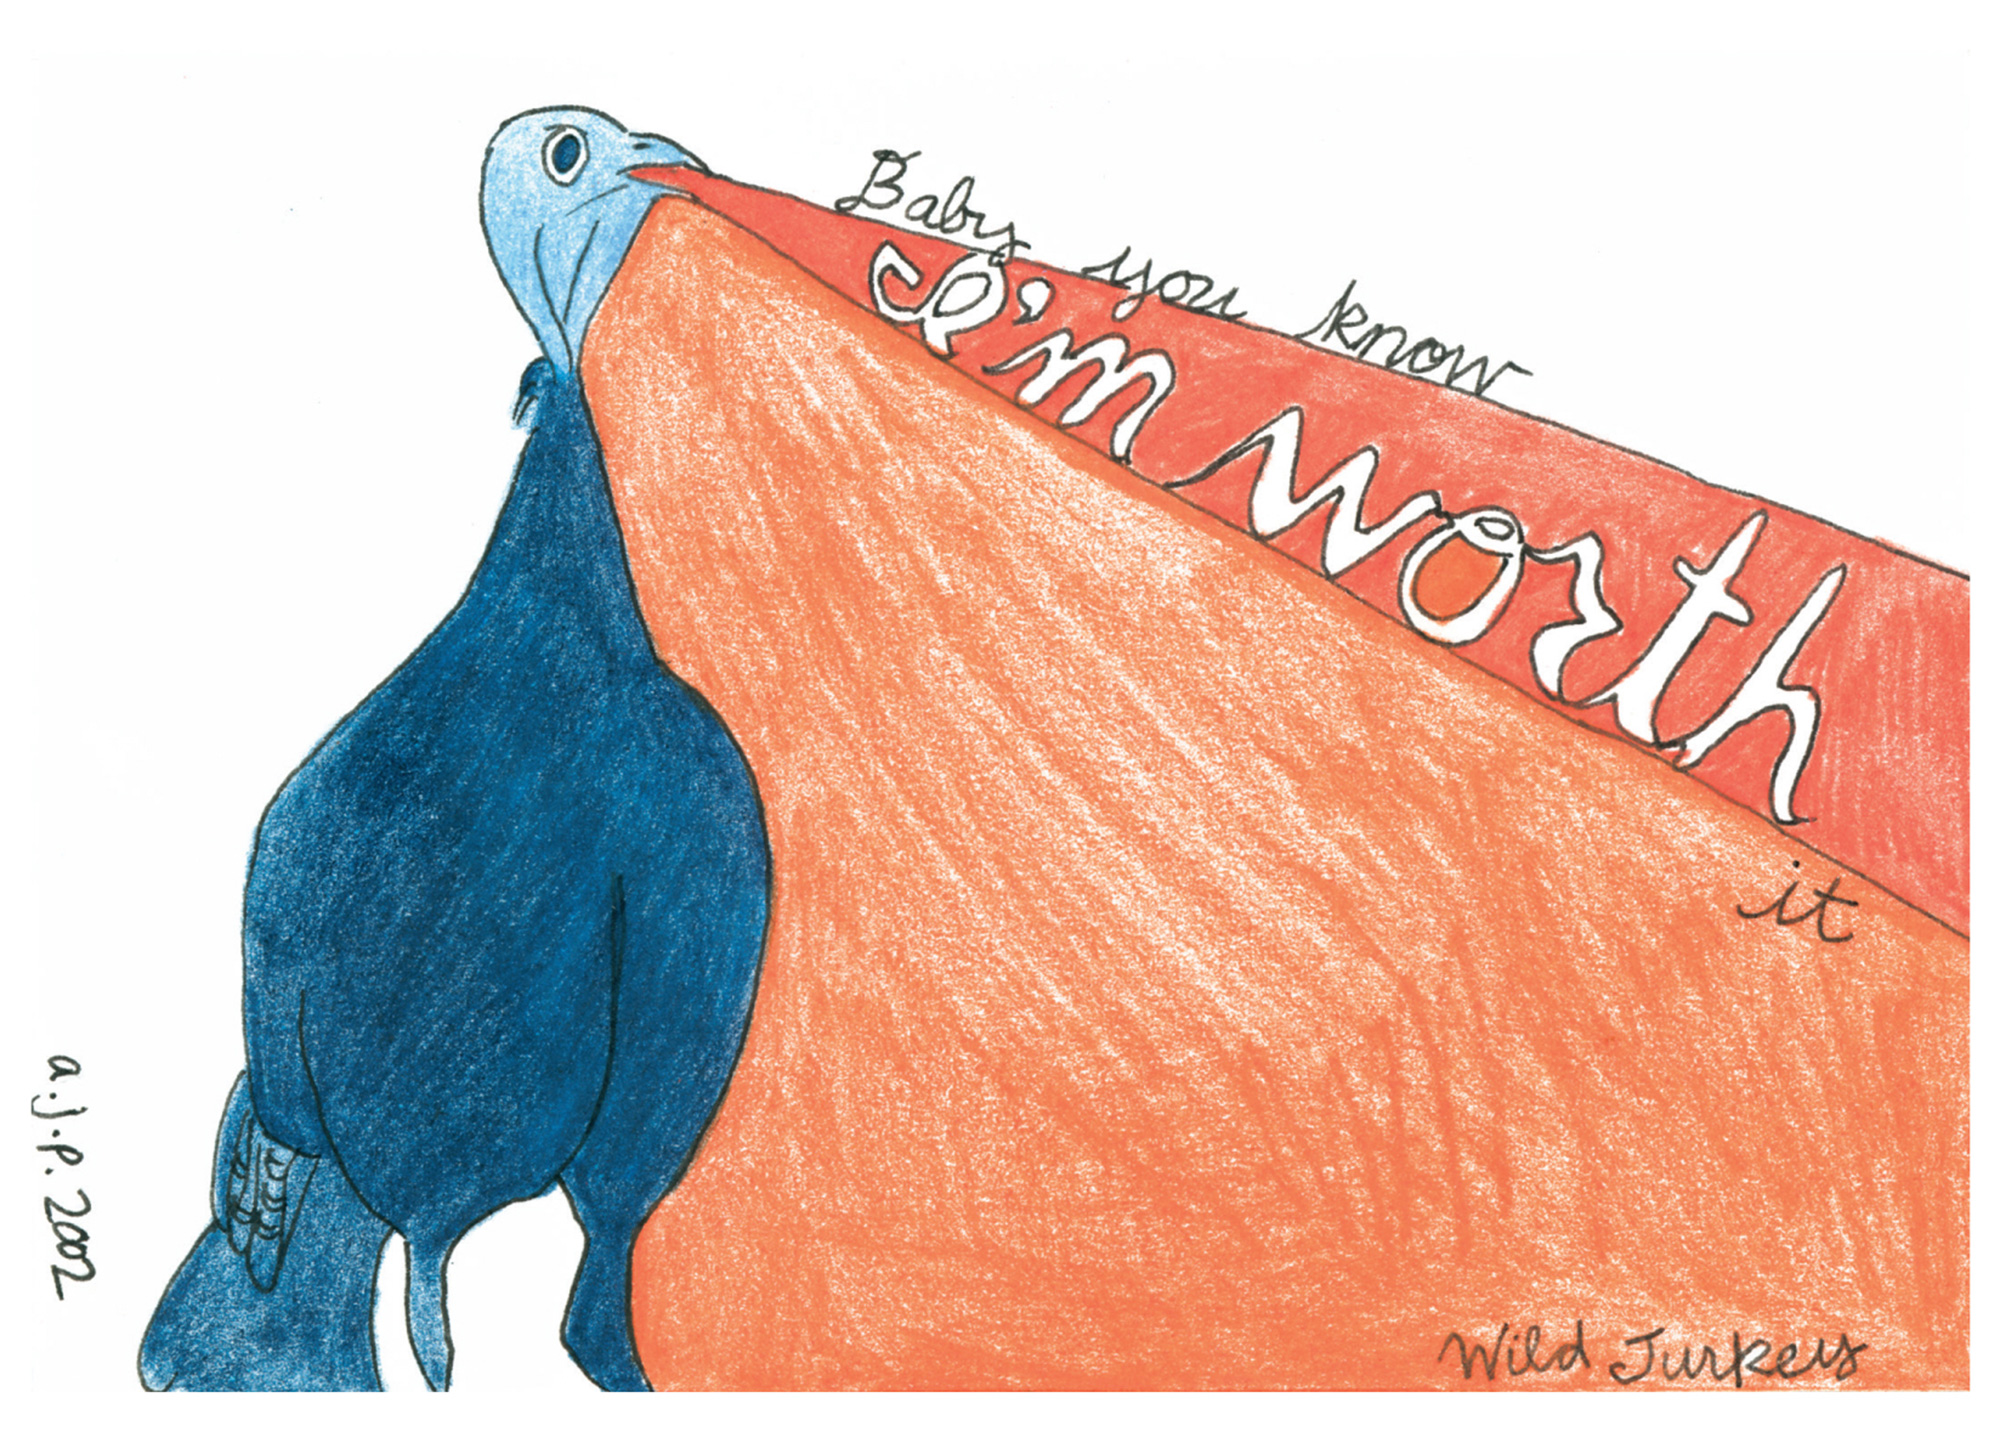 A 2002 drawing by Amy-Jean Porter of a wild turkey singing the words 